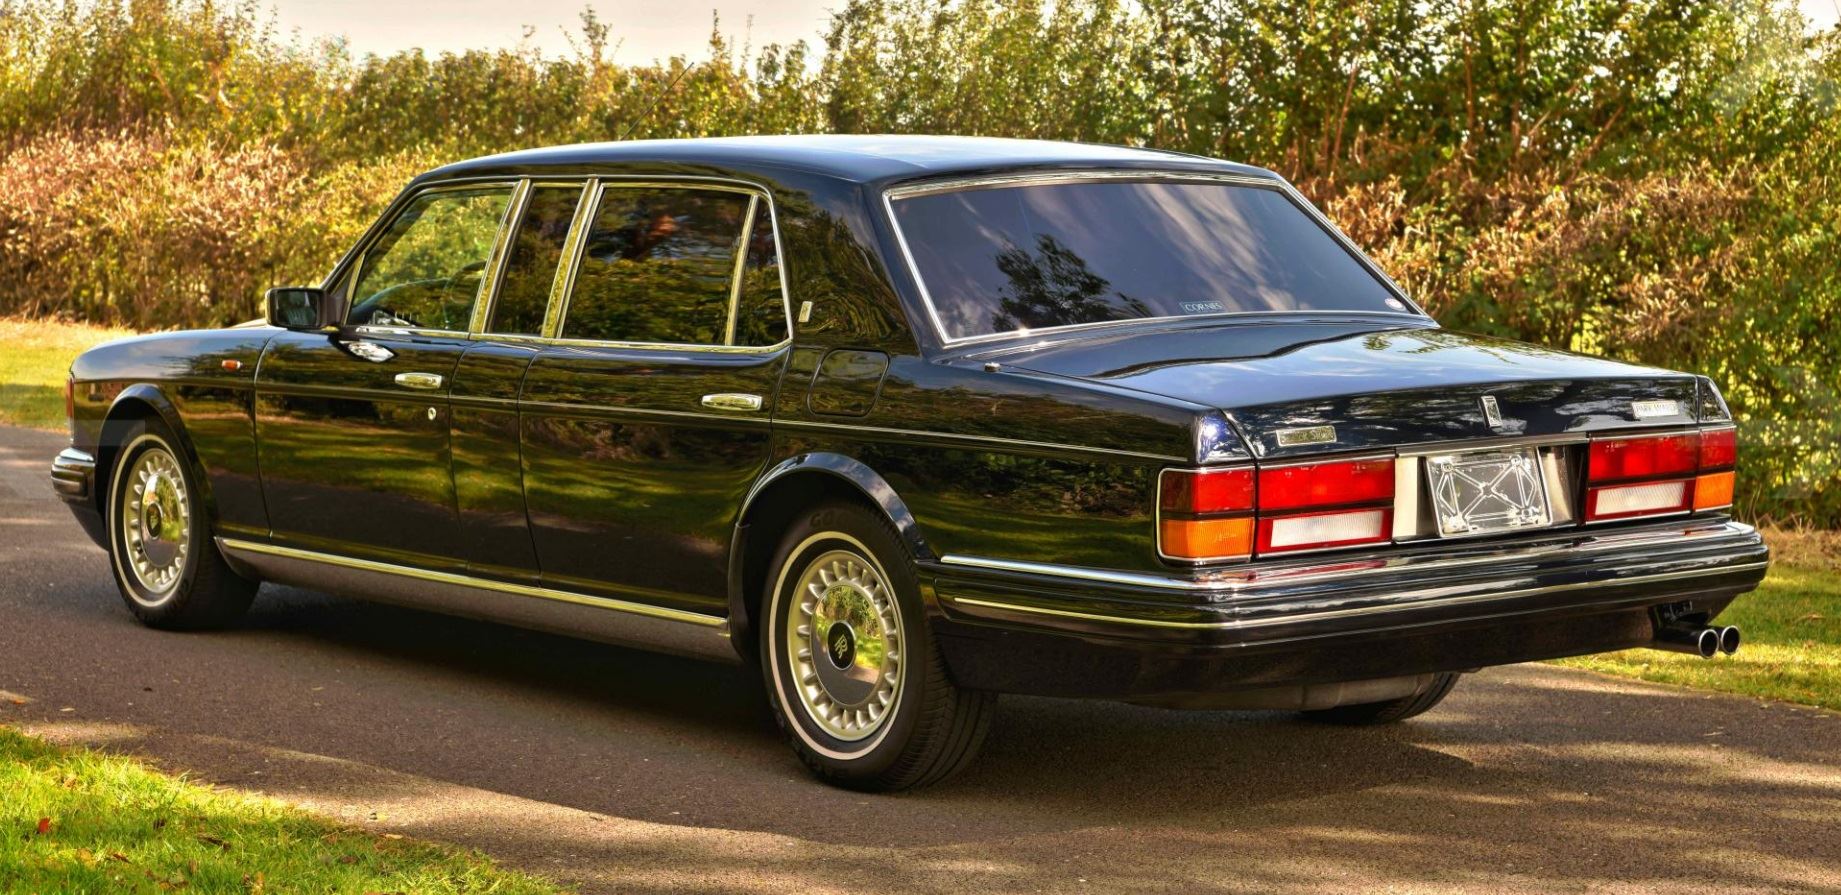 Rolls royce silver spur touring limousine lhd with division gd0c0qazhla2vtdcxzokq